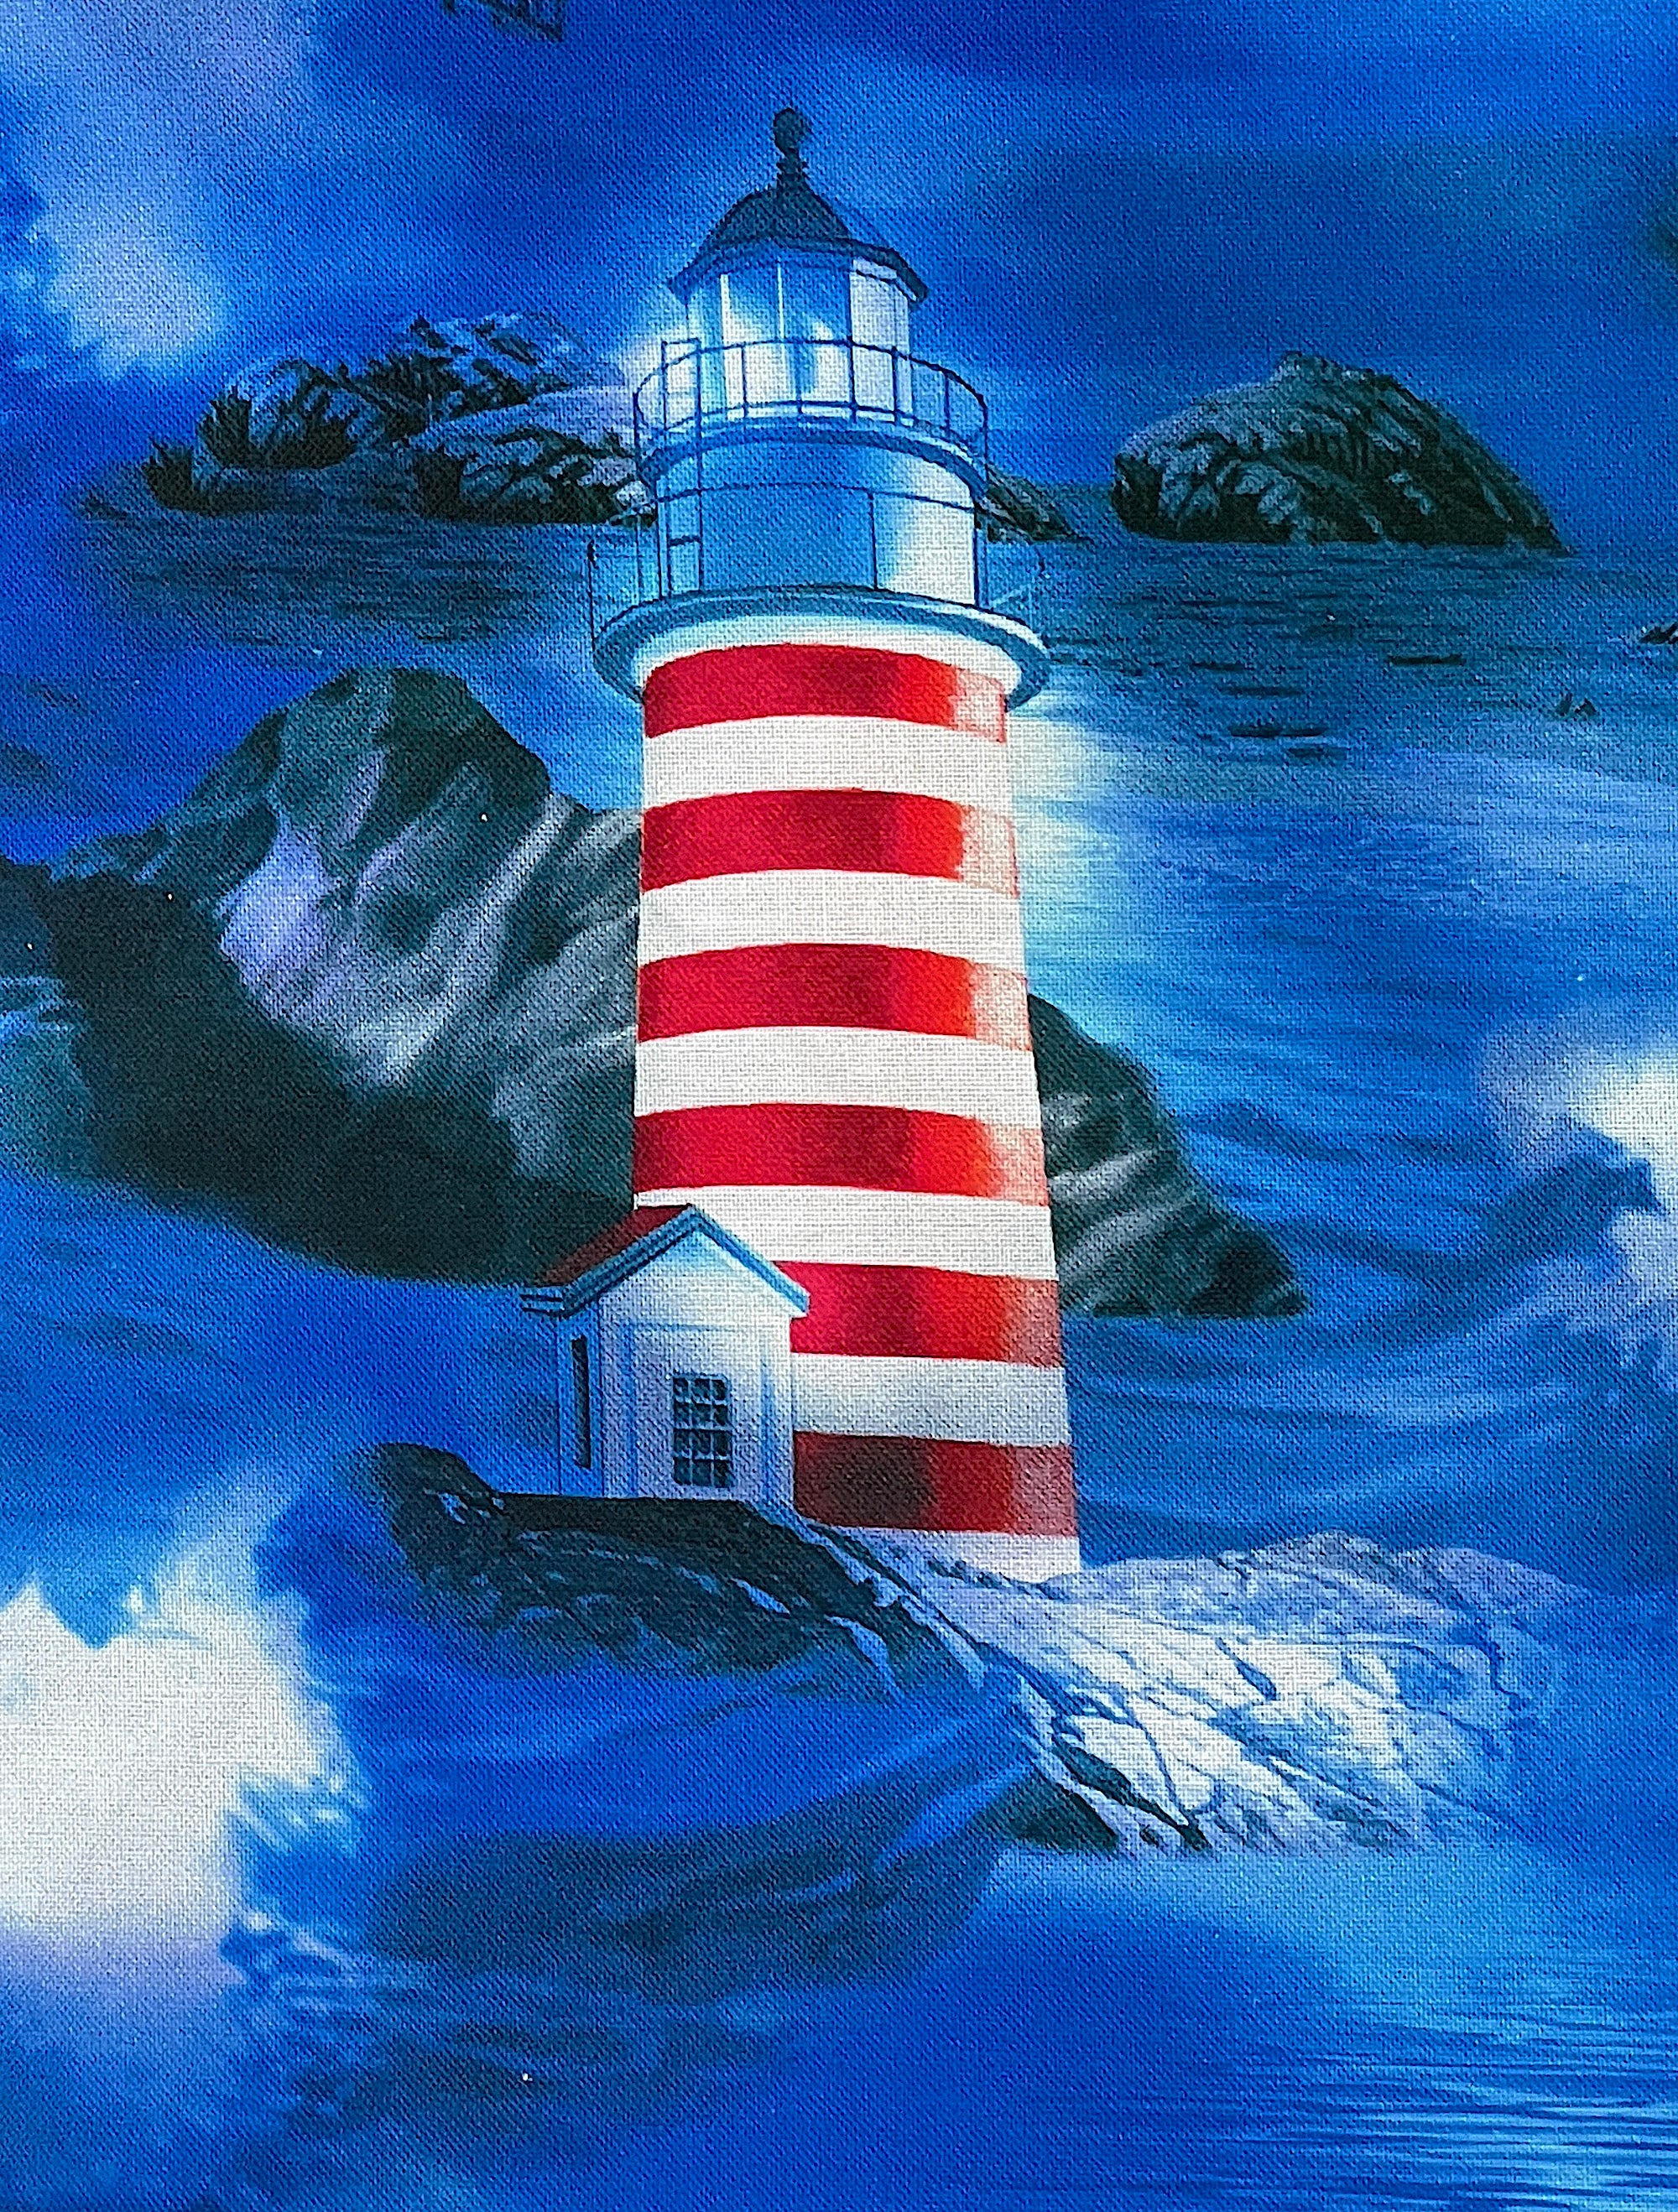 Close up oa a red and white striped lighthouse in the blue sea.